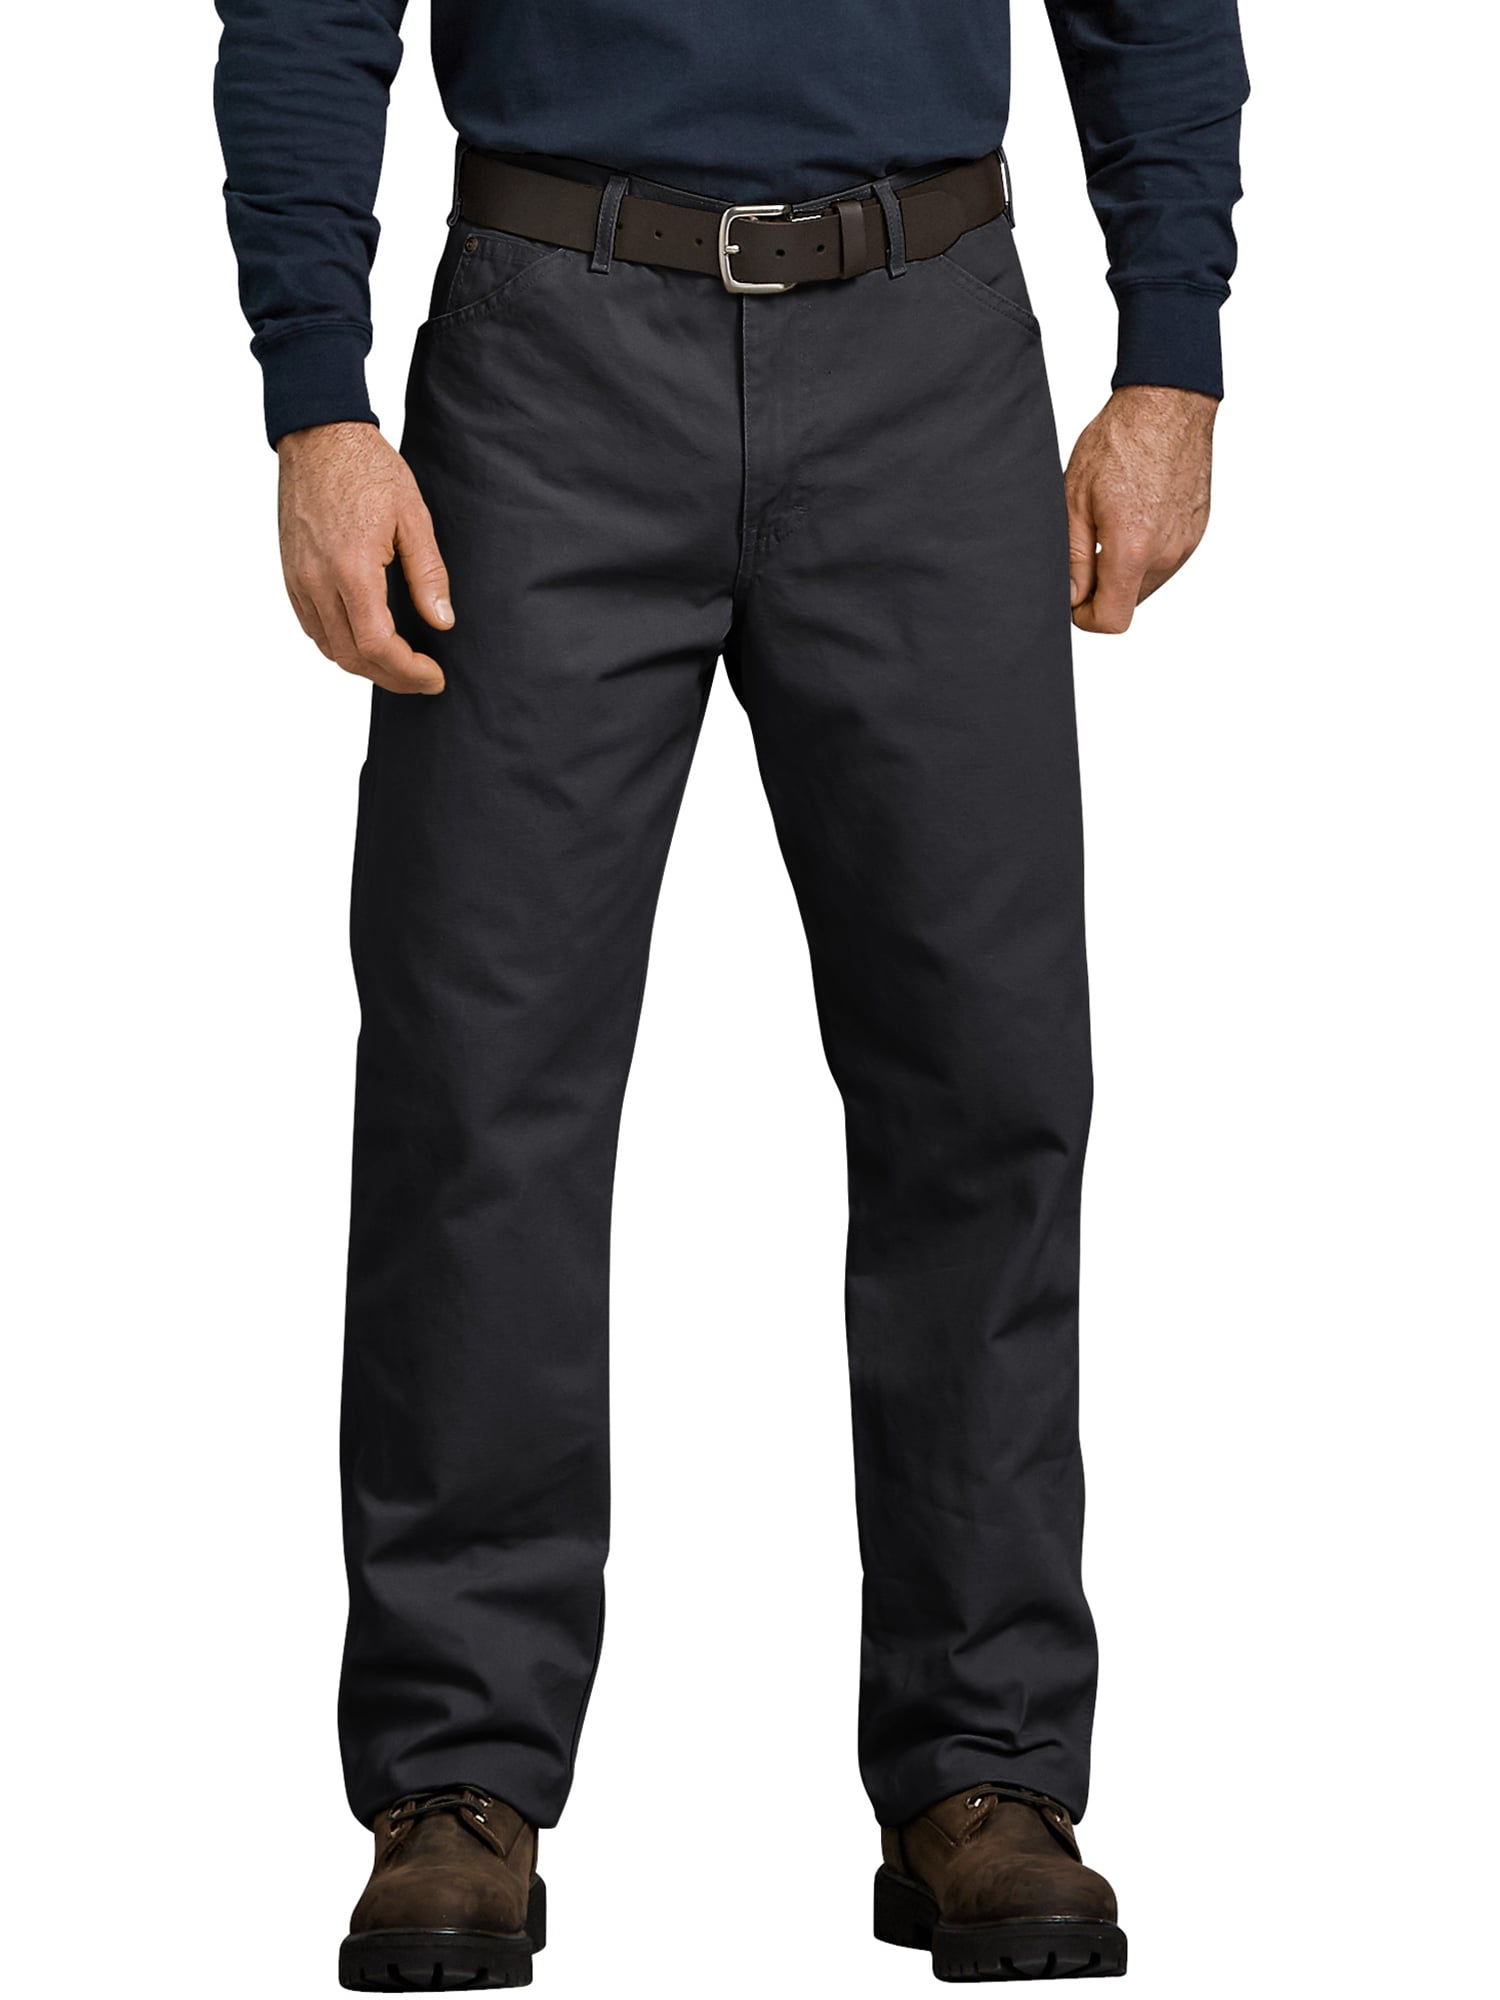 Mens Relaxed Fit Straight-Leg Duck Carpenter Jean Denim Work Pants with Pockets